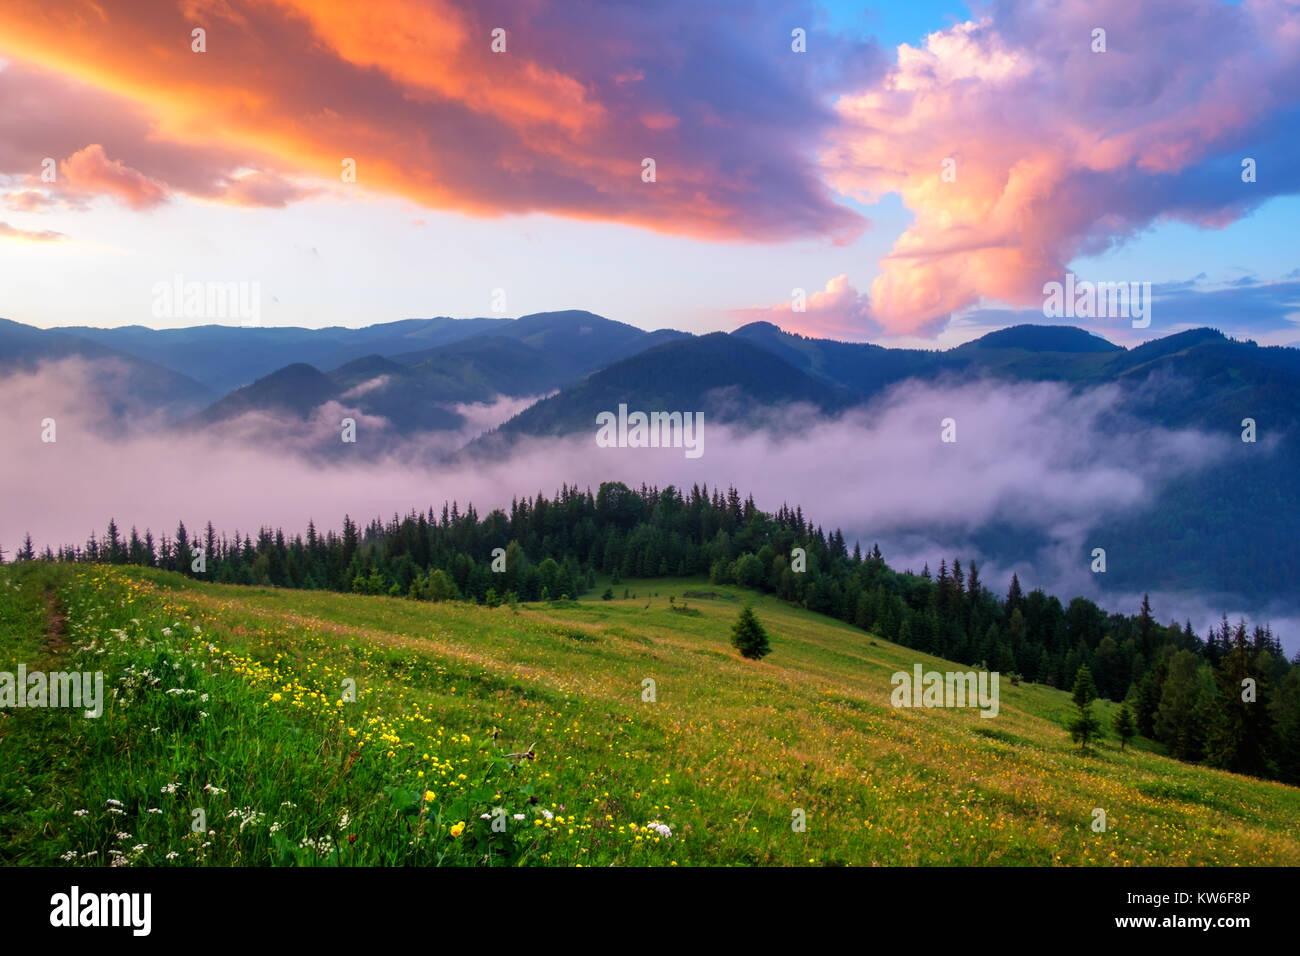 Picturesque summer landscape with colorful sunrise Stock Photo